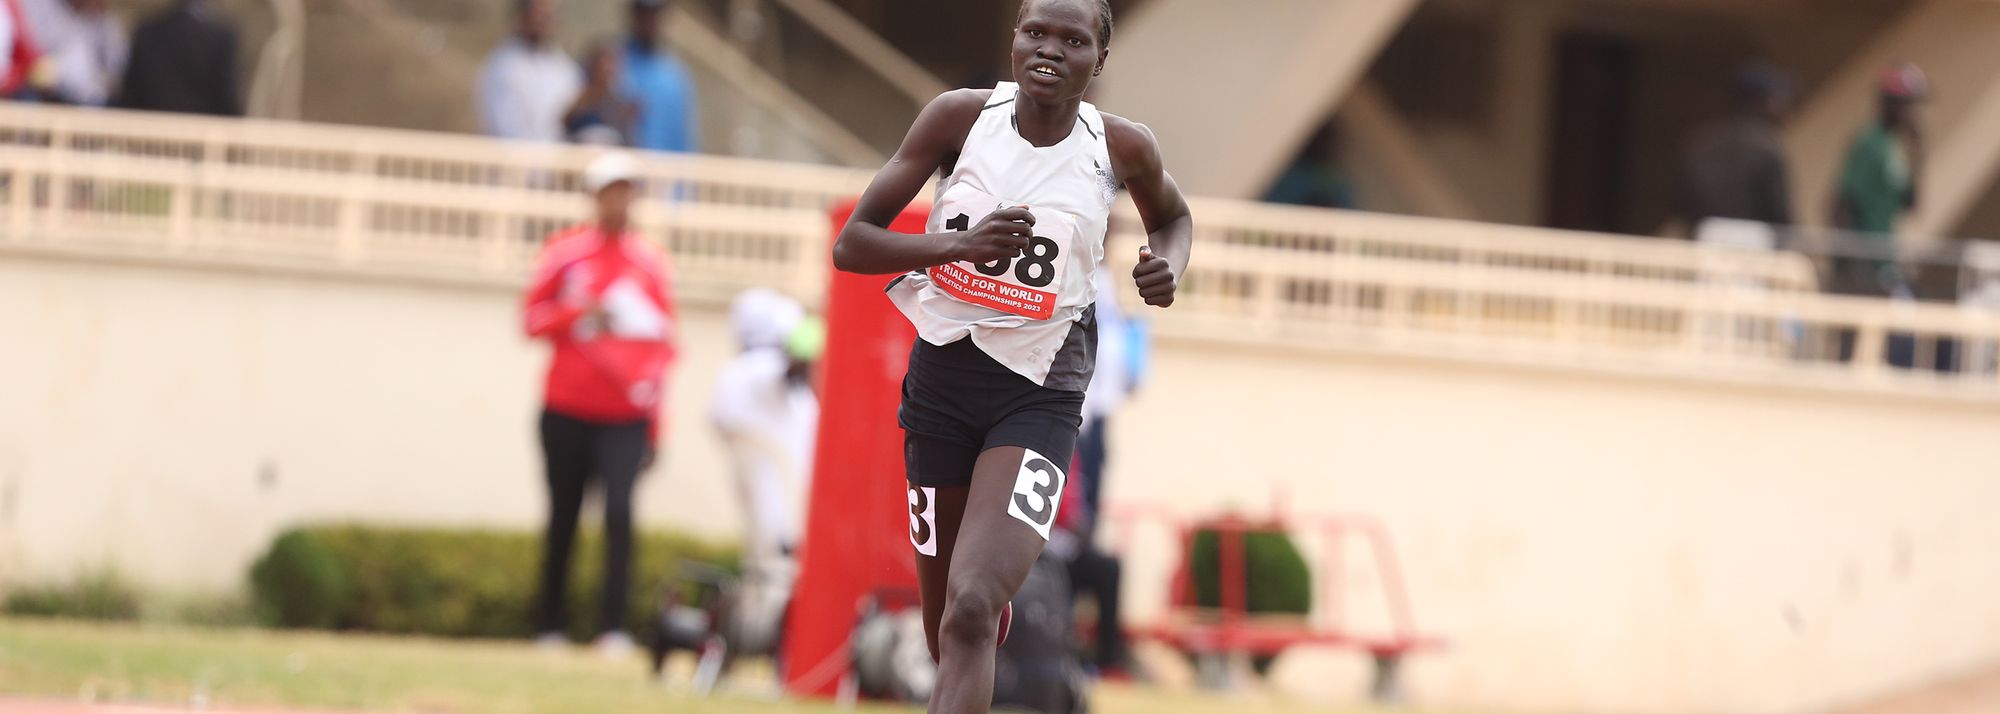 Perina Lokure Nakang has found a new lease on life thanks to the World Athletics U20 refugee programme as the 20-year-old prepares for the World Athletics Championships Budapest 23.